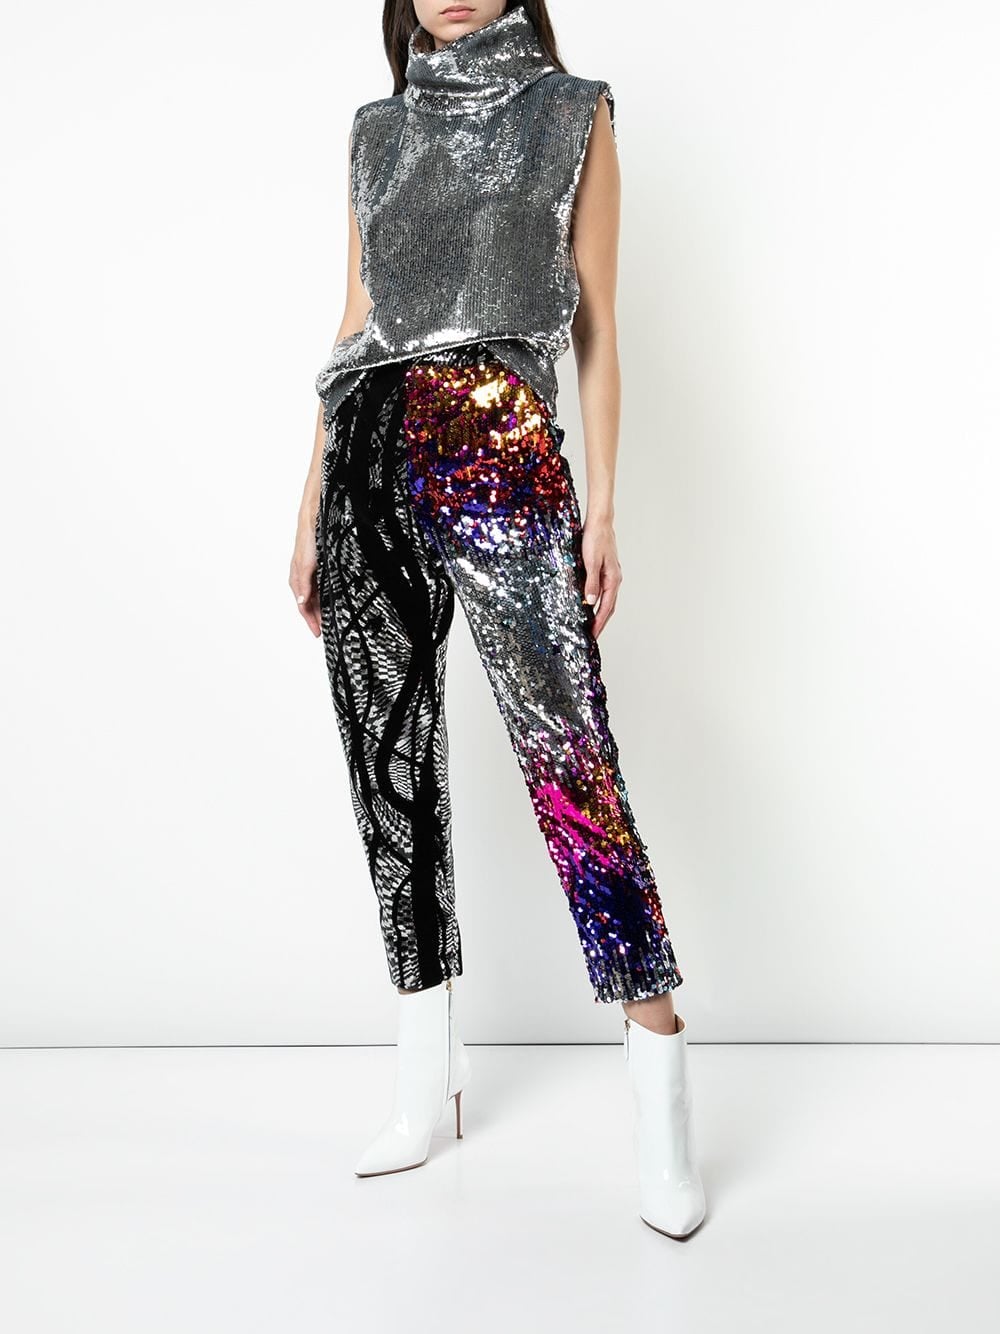 Details more than 60 zara sequin trousers latest - in.cdgdbentre